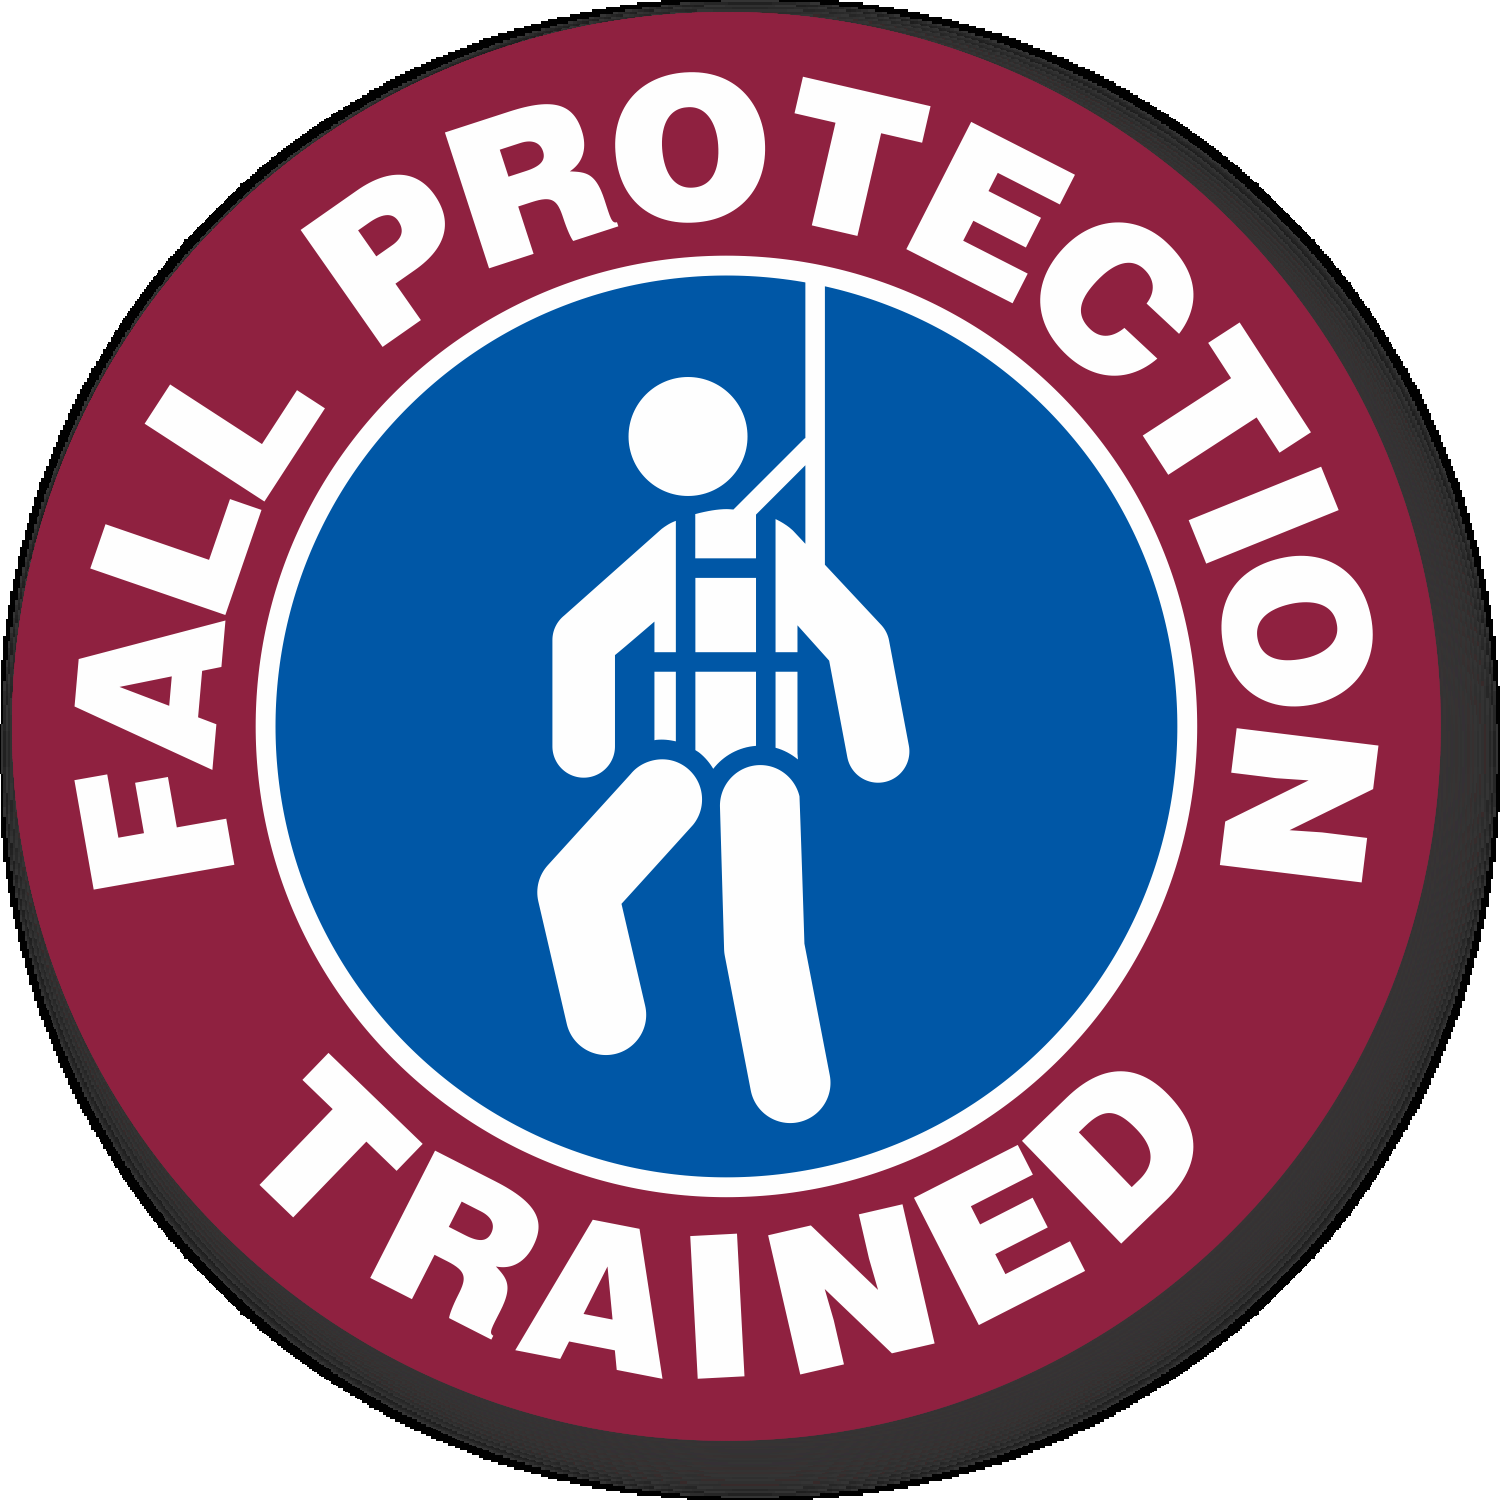 Make everyone know who is trained in fall protection. Use a "FALL  PROTECTION TRAINED" Hard hat decals that are proven to last